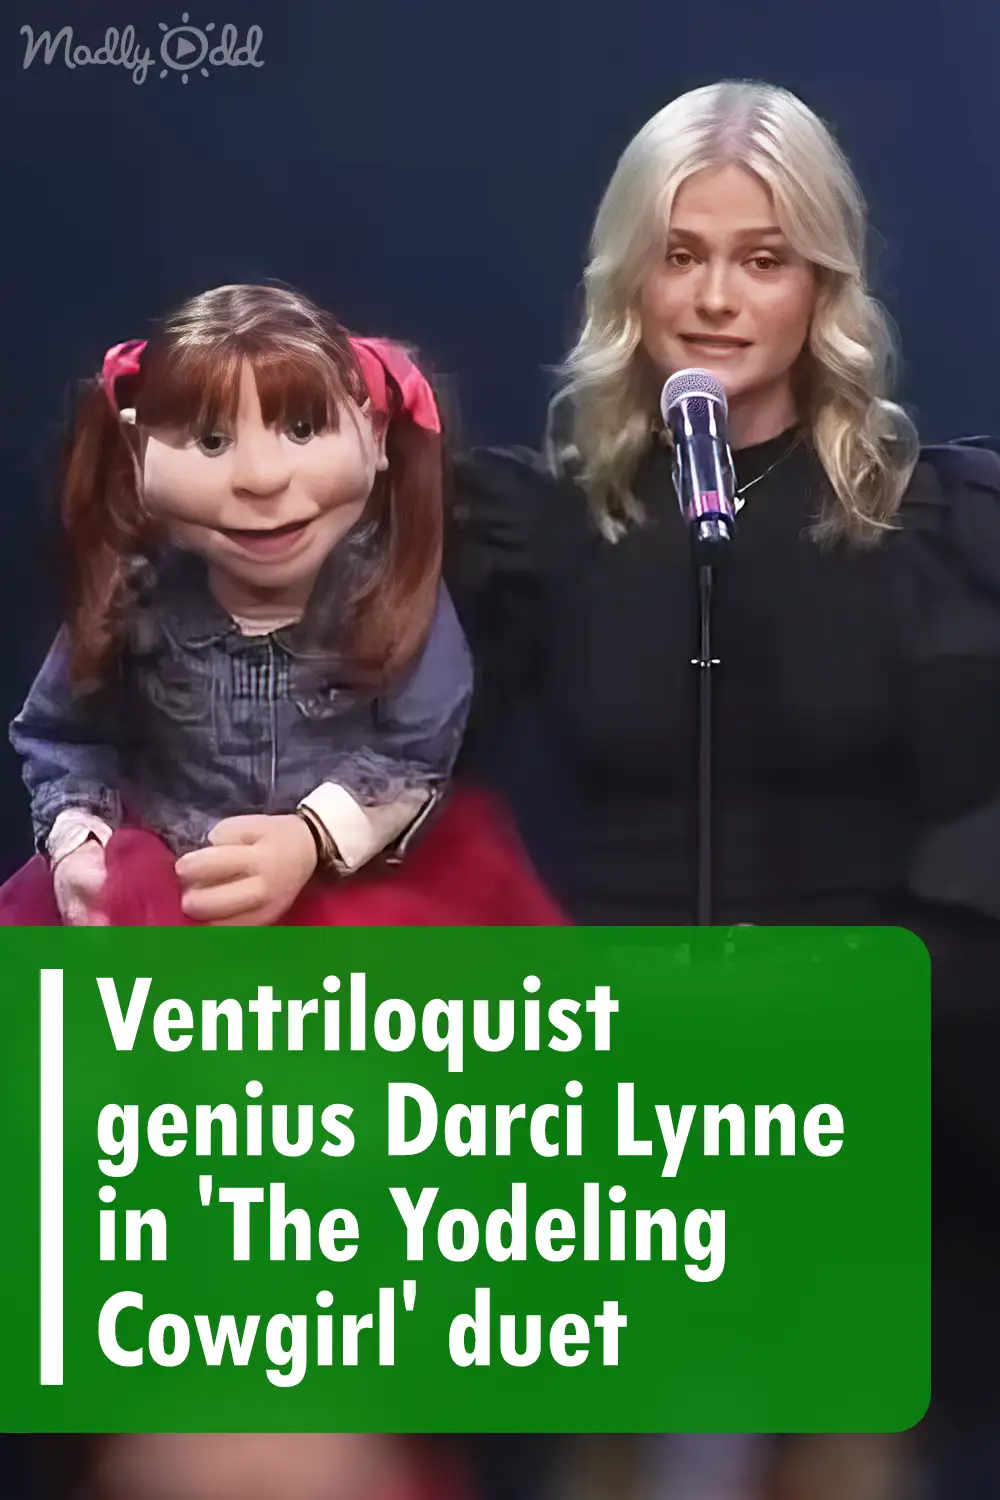 Ventriloquist genius Darci Lynne in \'The Yodeling Cowgirl\' duet